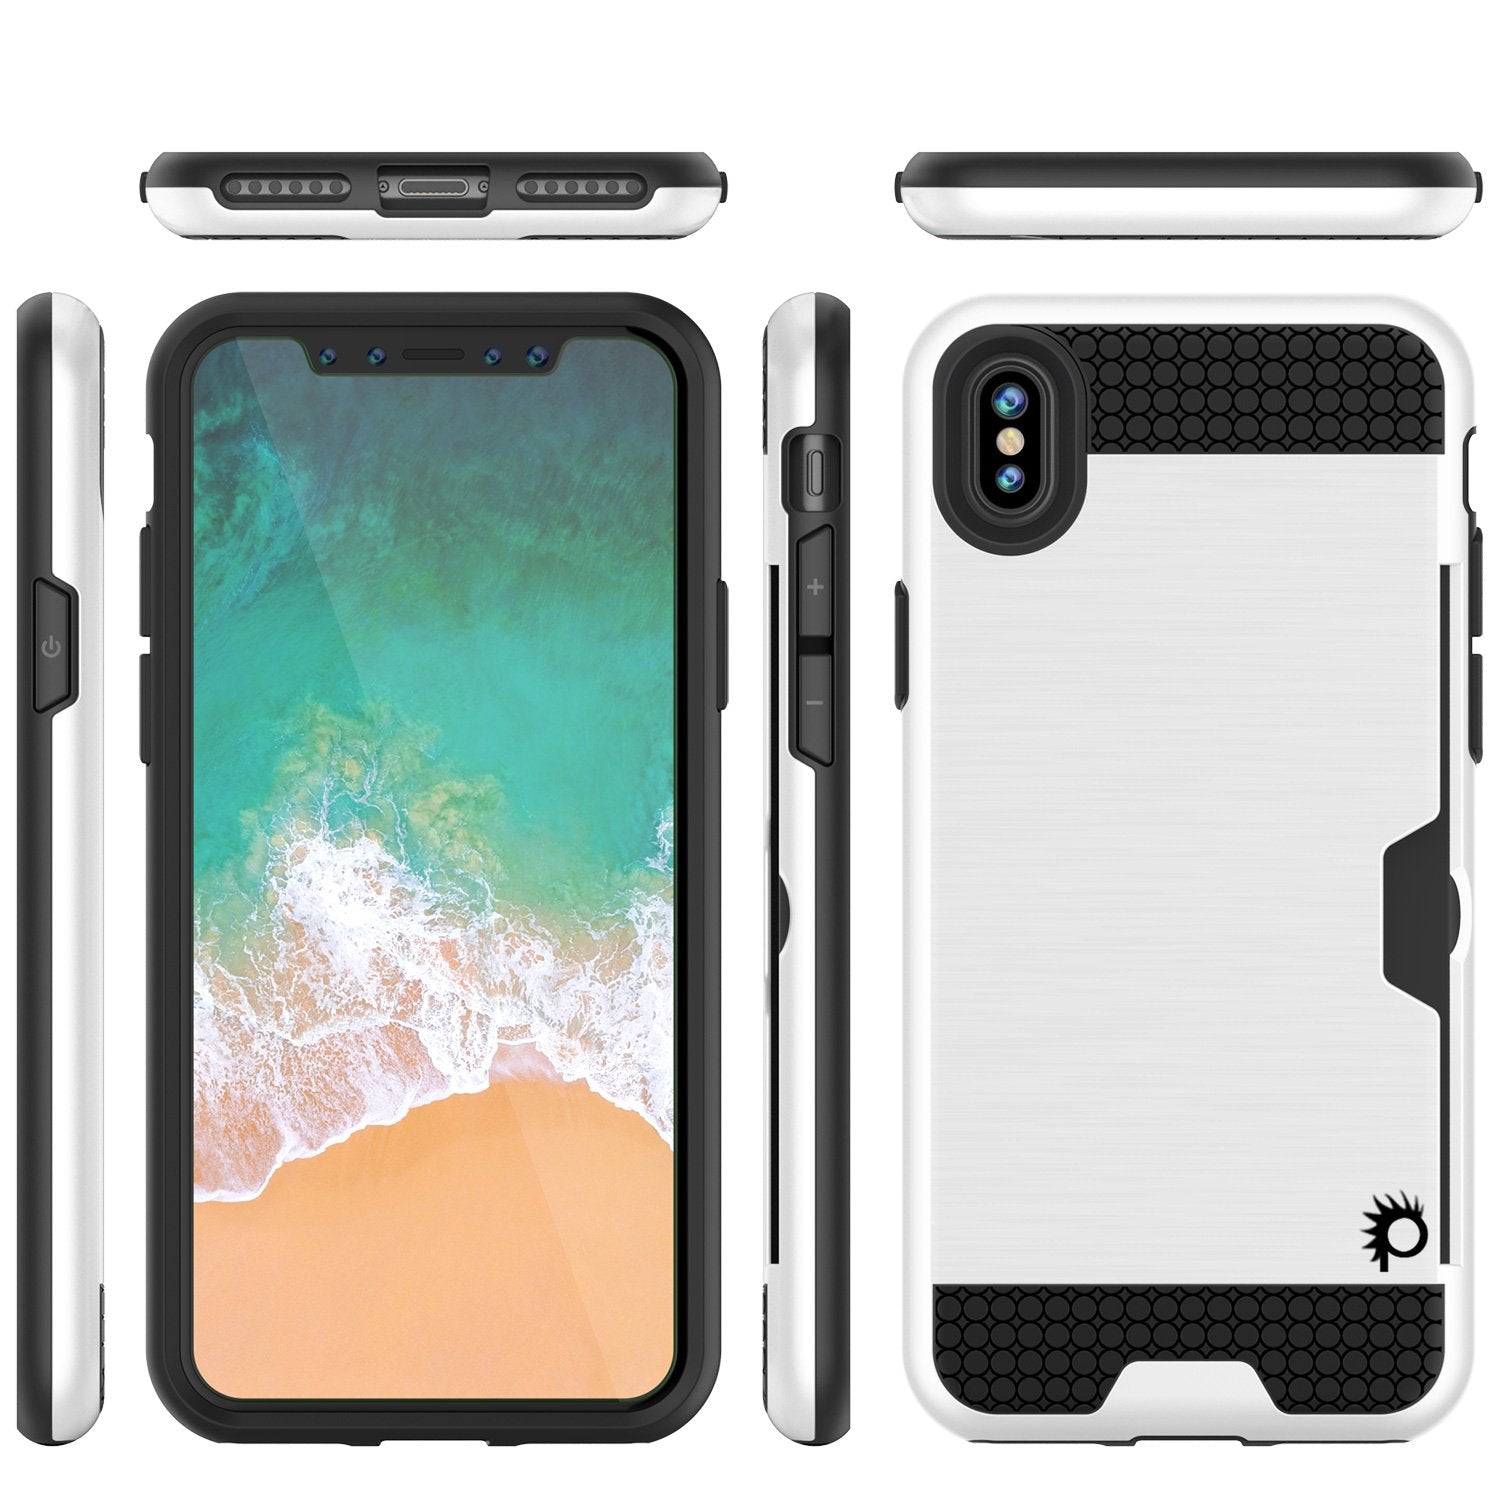 iPhone X Case, PUNKcase [SLOT Series] Slim Fit Dual-Layer Armor Cover & Tempered Glass PUNKSHIELD Screen Protector for Apple iPhone X [White]